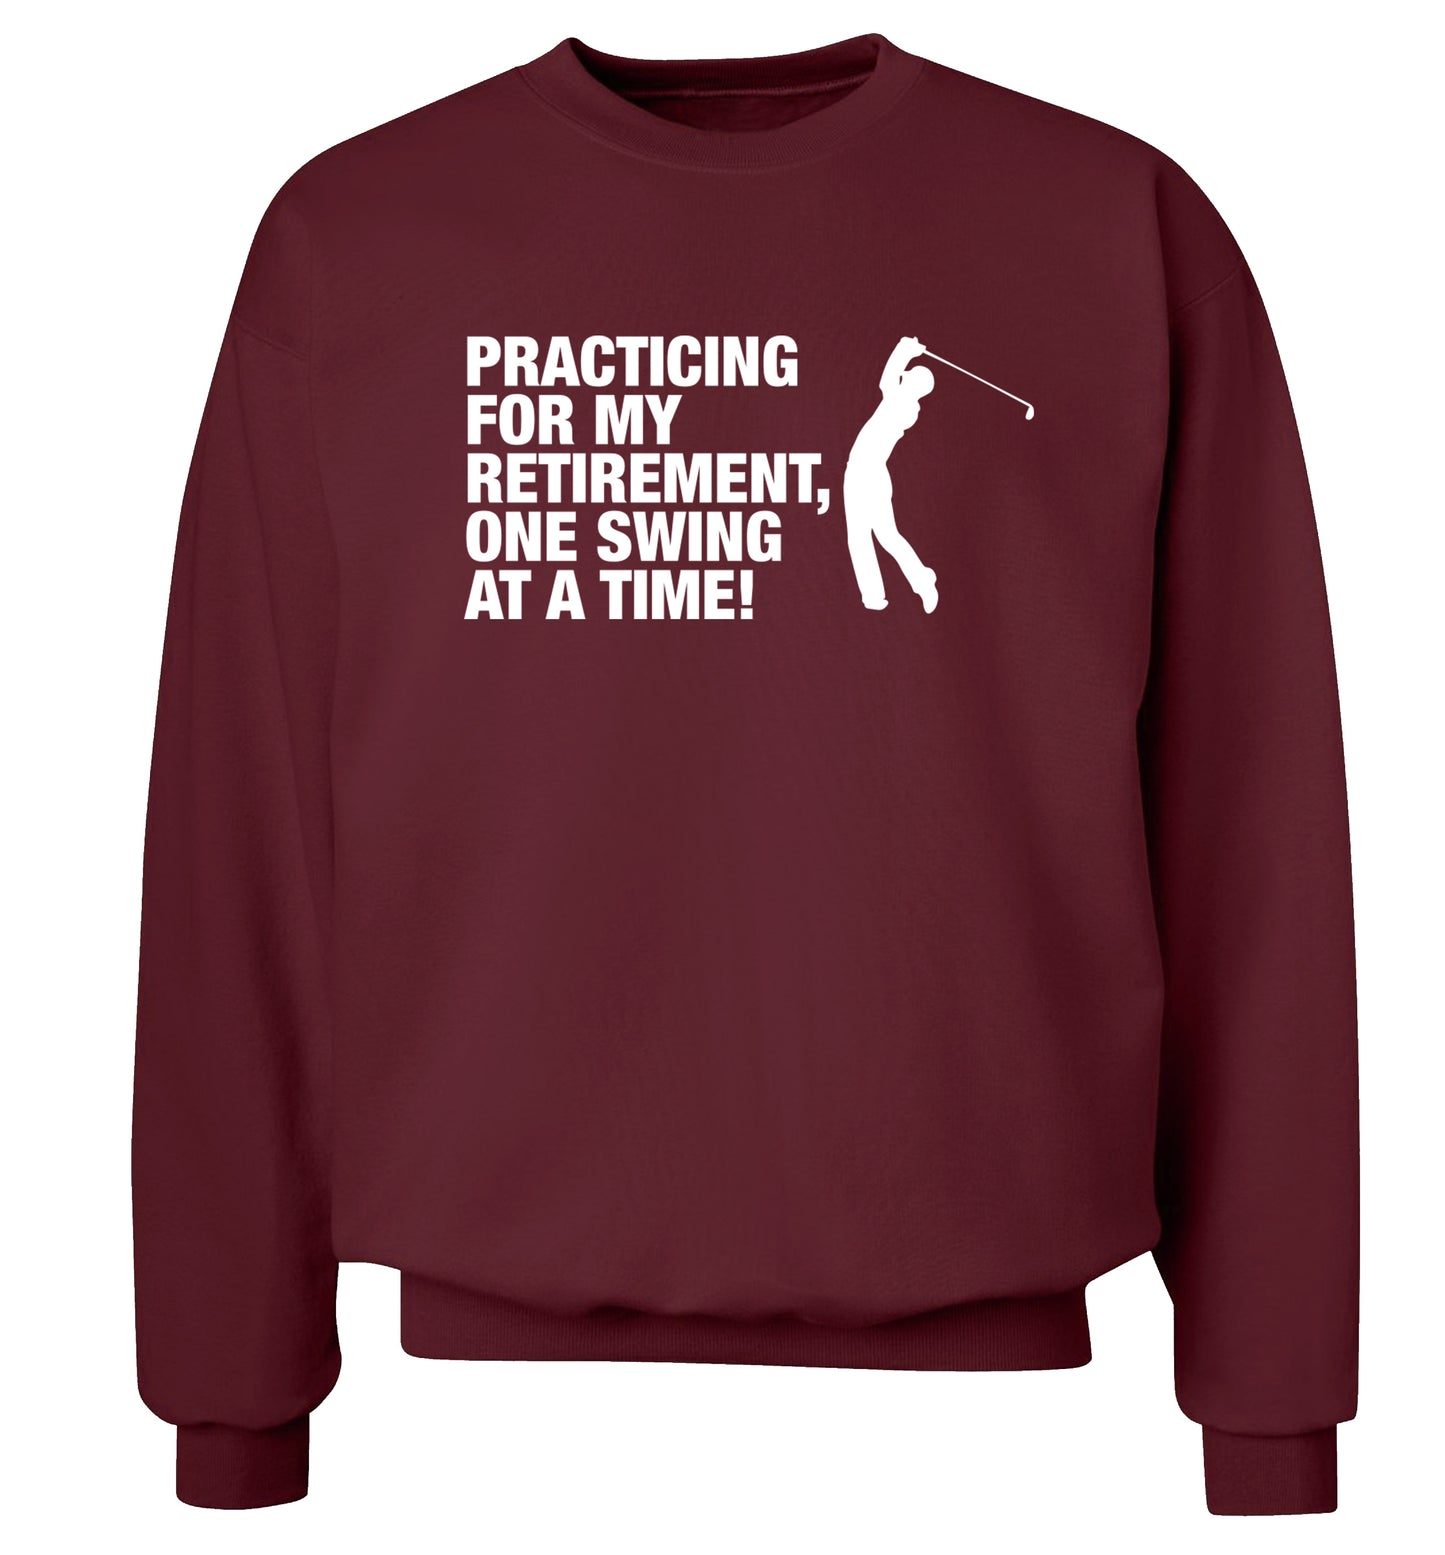 Practicing for my retirement one swing at a time Adult's unisex maroon Sweater 2XL